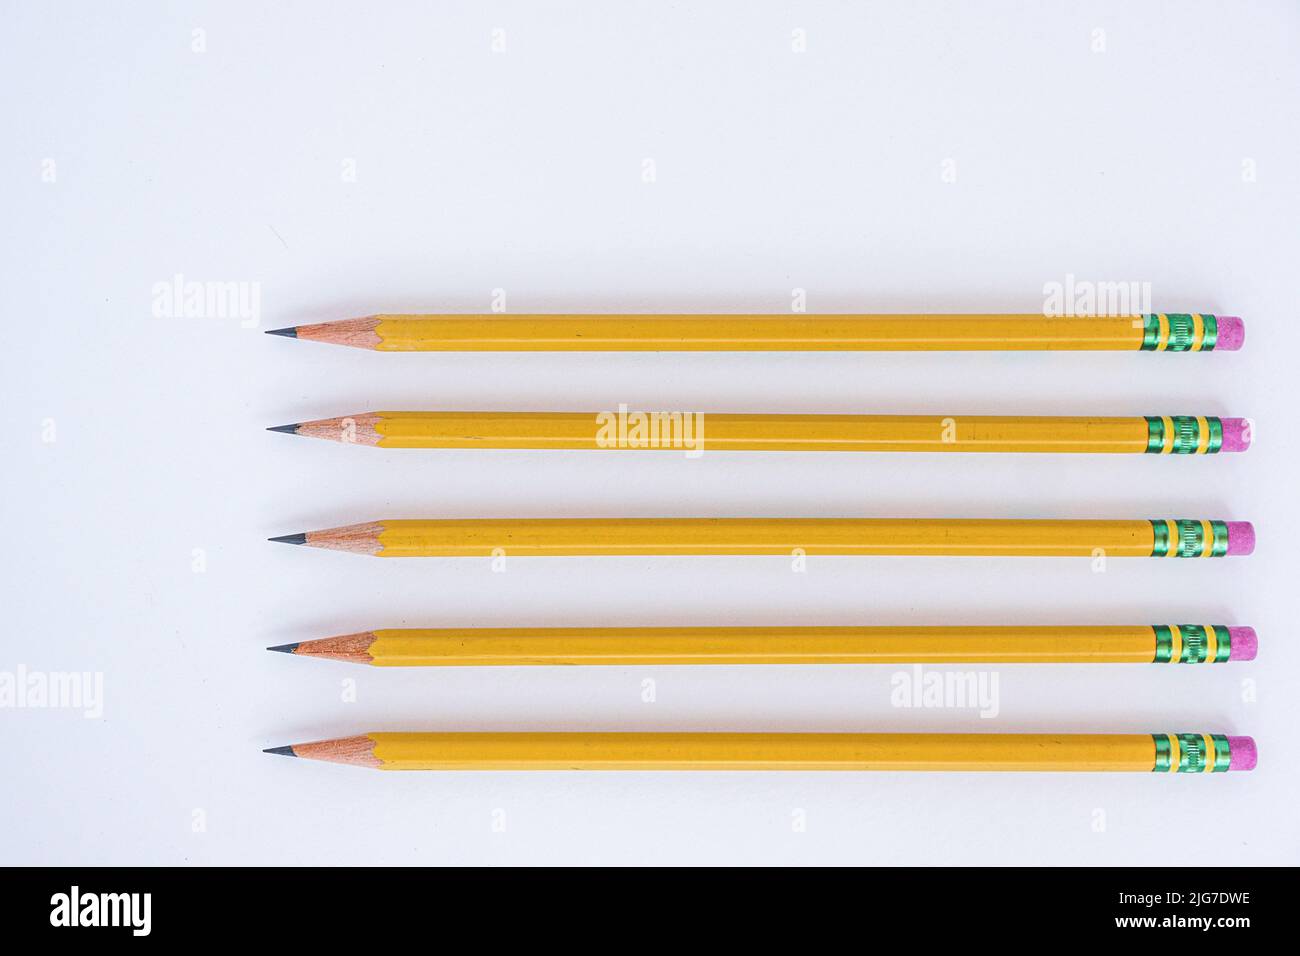 Negative space is utilized with five sharp pencils lined up on a white sheet of paper pointing to the left. Stock Photo